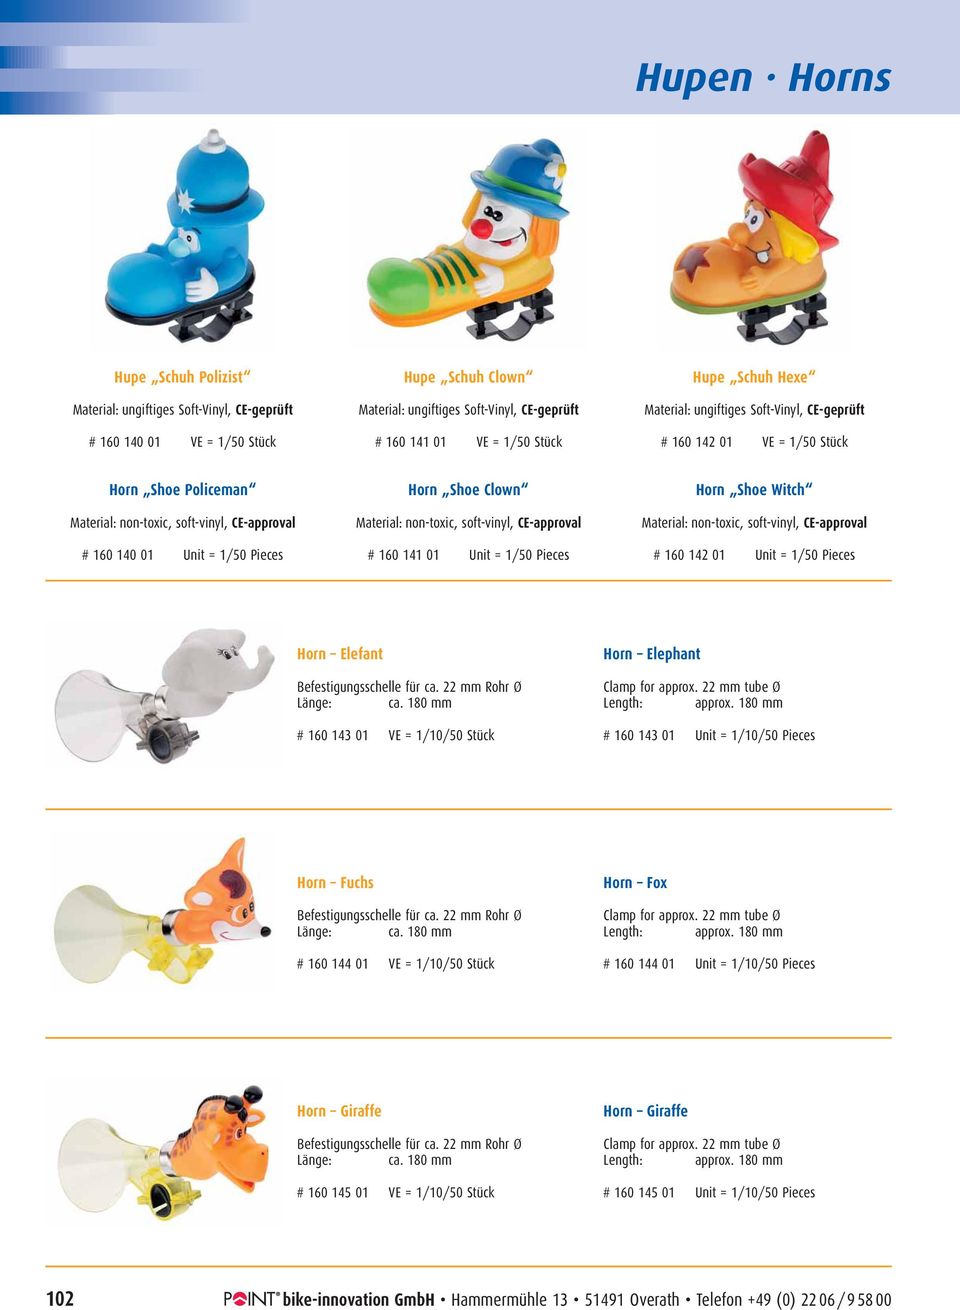 Material: non-toxic, soft-vinyl, CE-approval # 160 141 01 Unit = 1/50 Pieces Horn Shoe Witch Material: non-toxic, soft-vinyl, CE-approval # 160 142 01 Unit = 1/50 Pieces Horn Elefant Horn Elephant #